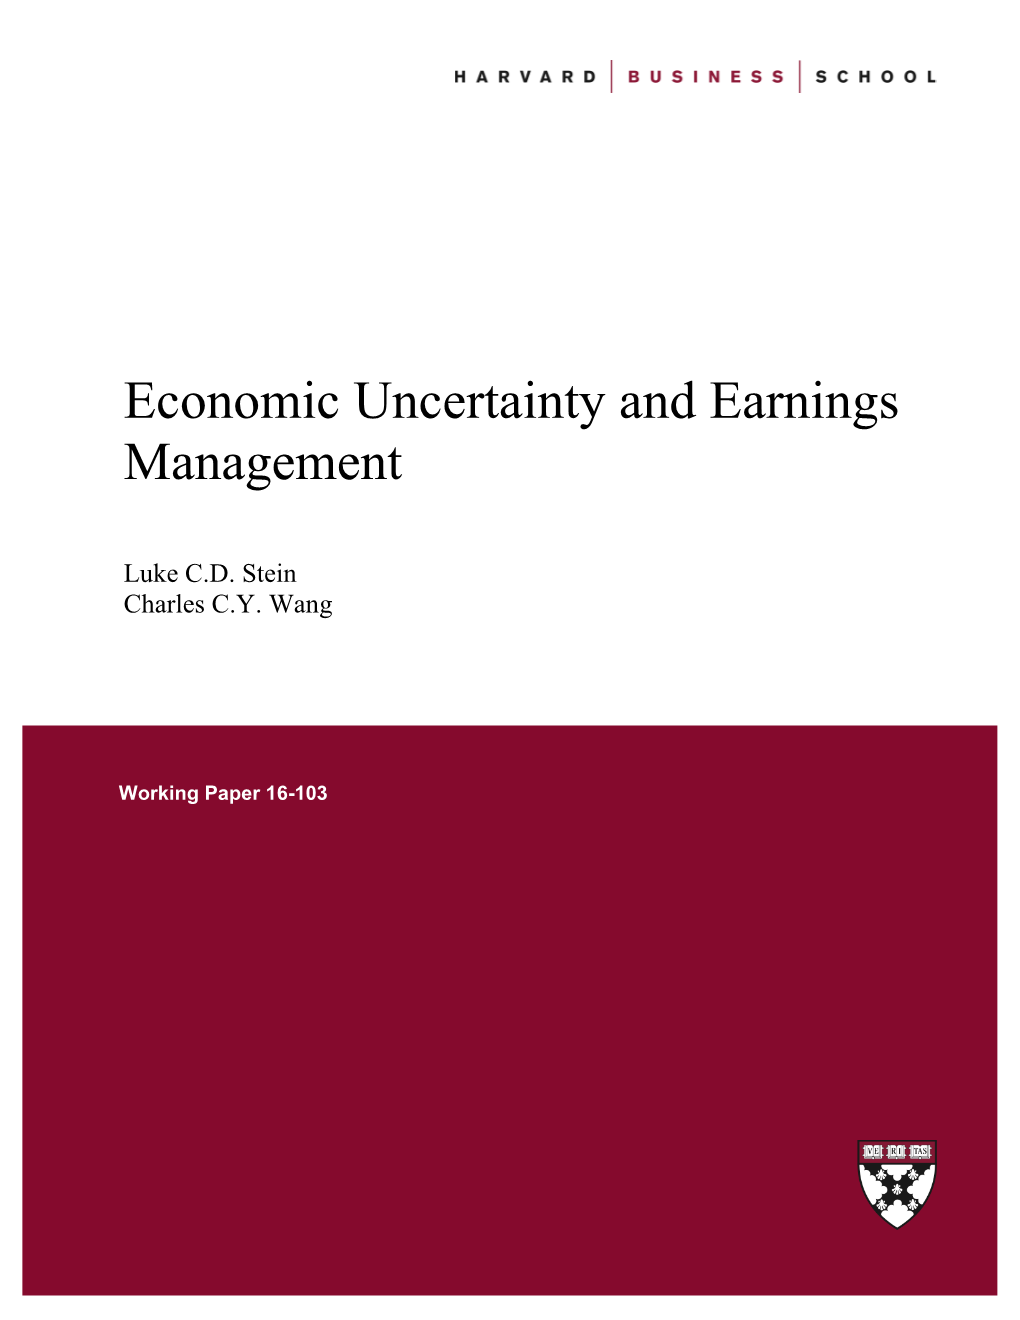 Economic Uncertainty and Earnings Management